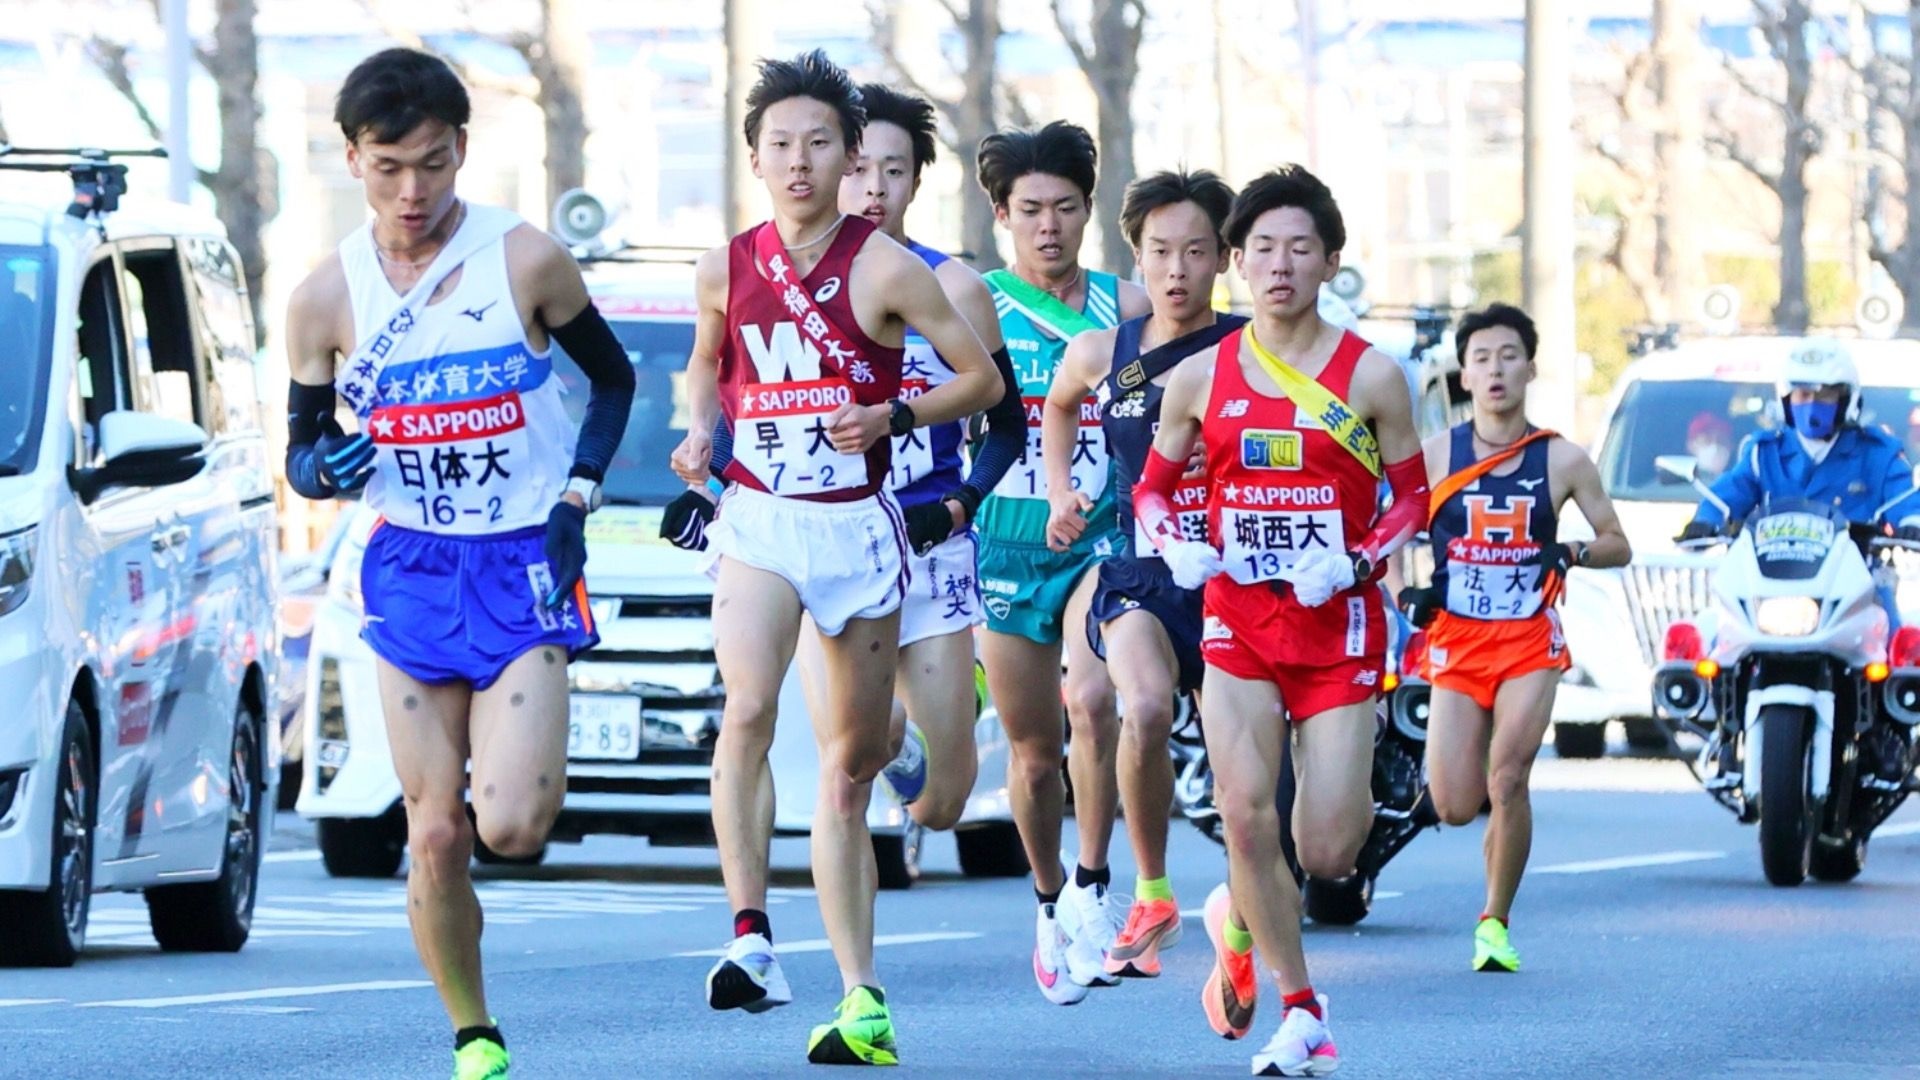 Ekiden: National High School Race Tournament, 21 varsity teams from the Kanto region covered 107.5 km divided into 5 intervals, 2021. 1920x1080 Full HD Background.